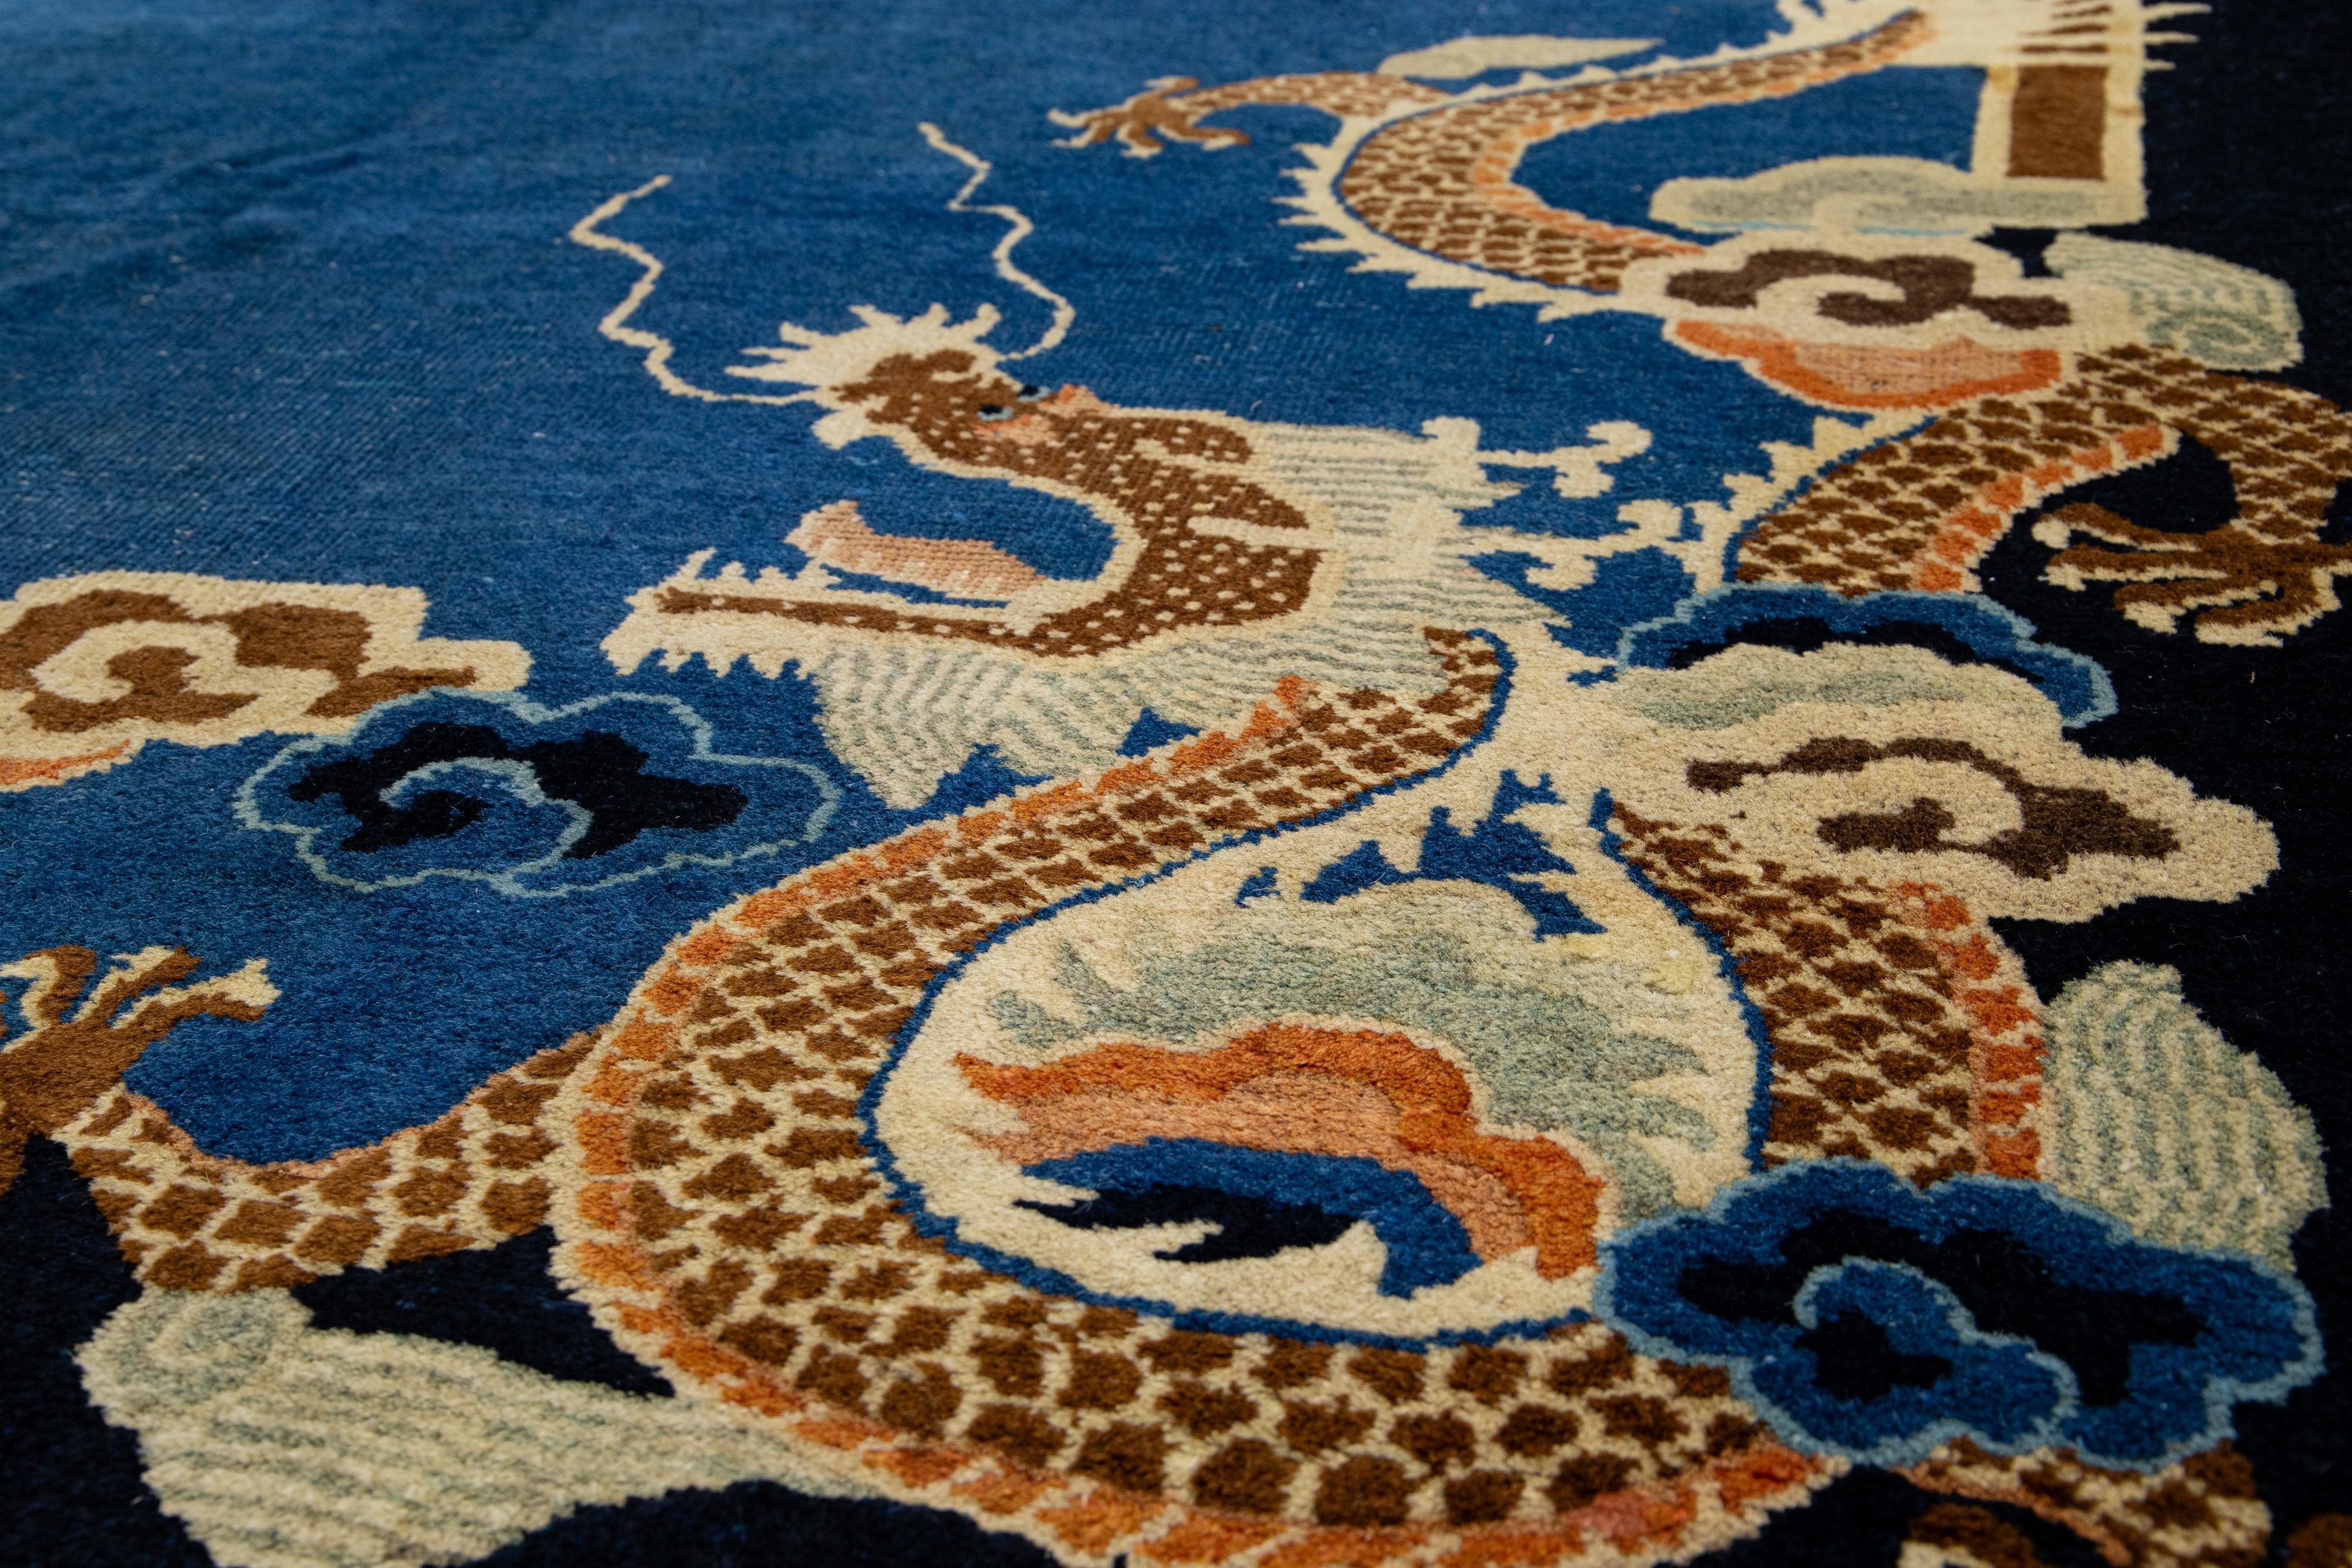 Beautiful antique Chinese Art Deco Peking hand-knotted wool rug with a navy-blue field, the frame of dark blue. This rug has beige, peach, and brown accents in a subtle all-over Classic Chinese dragon motif.

This rug measures: 6'8